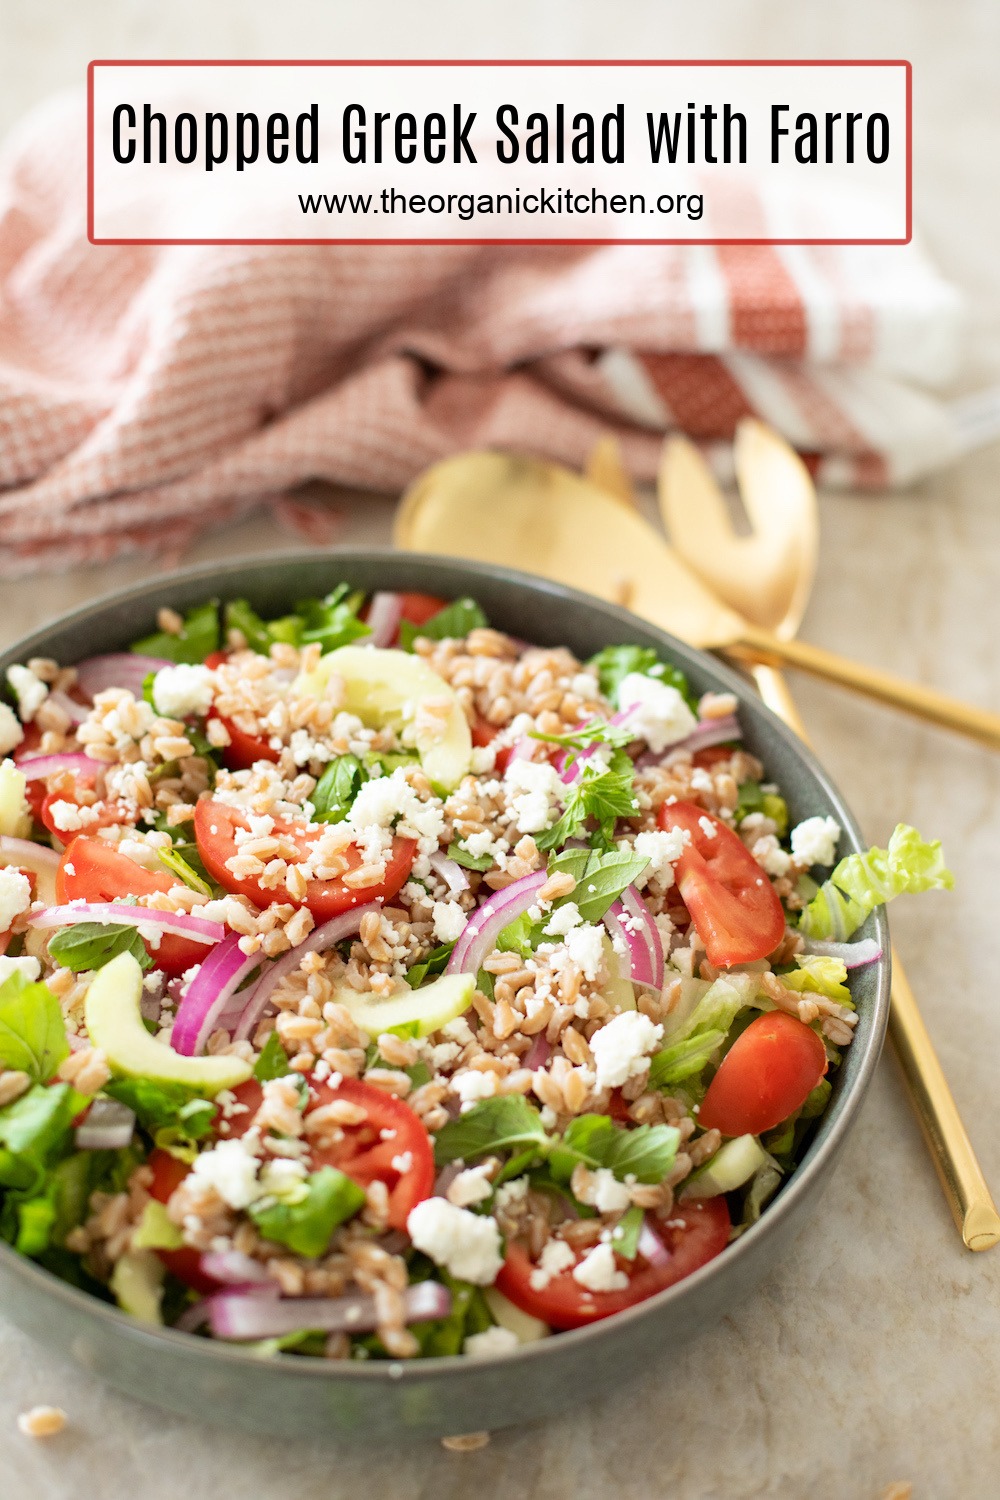 Chopped Greek Salad with Farro in a grey bowl with gold serving spoons